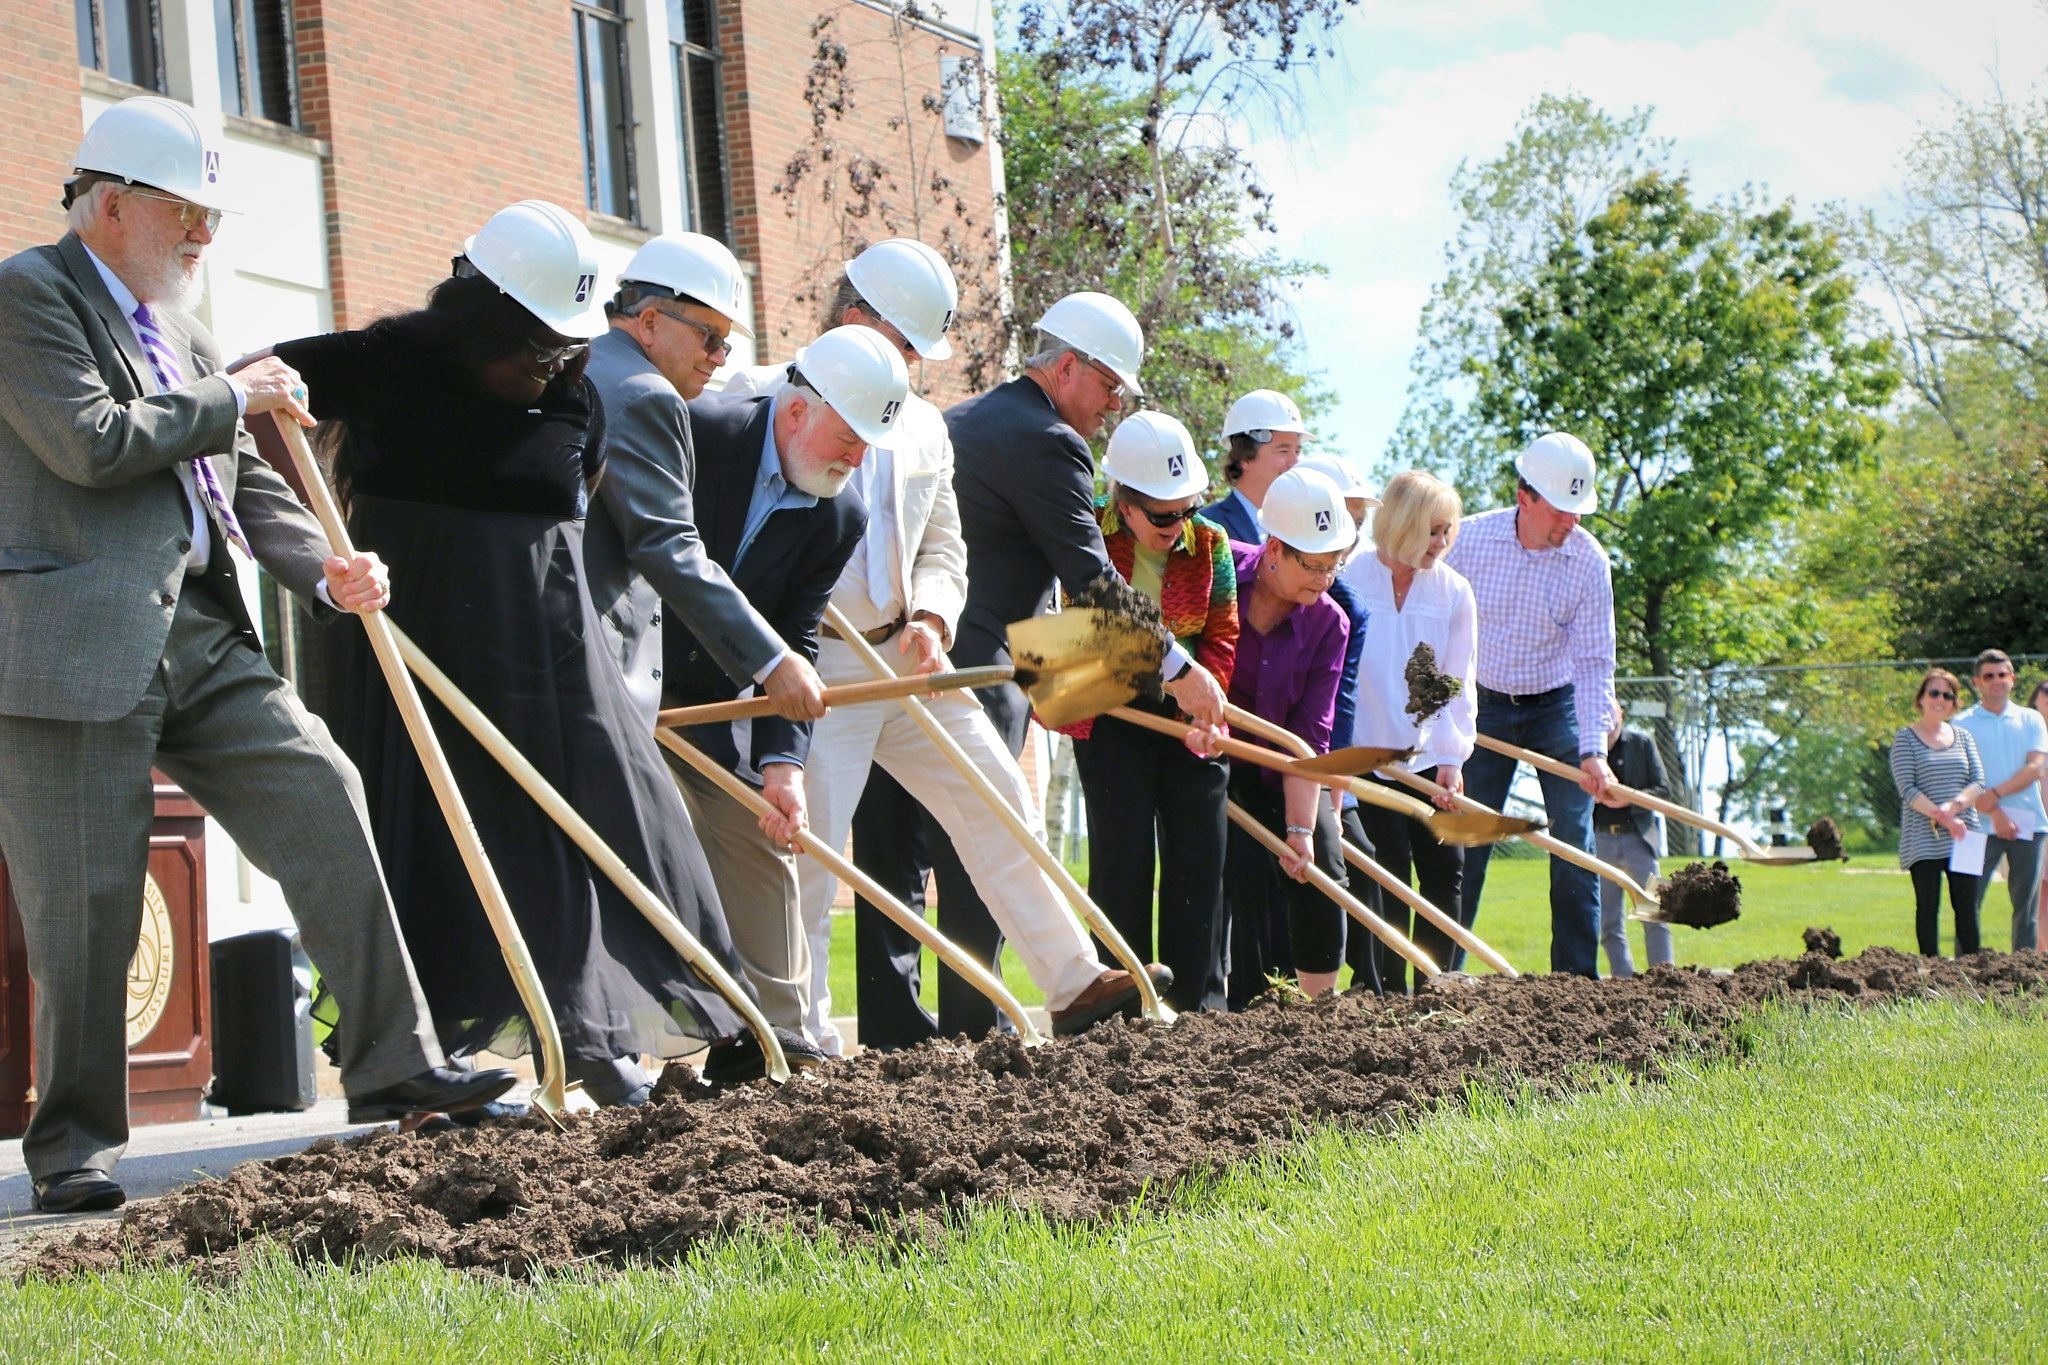 Ground breaking ceremony for the Goppert Performing Arts Center